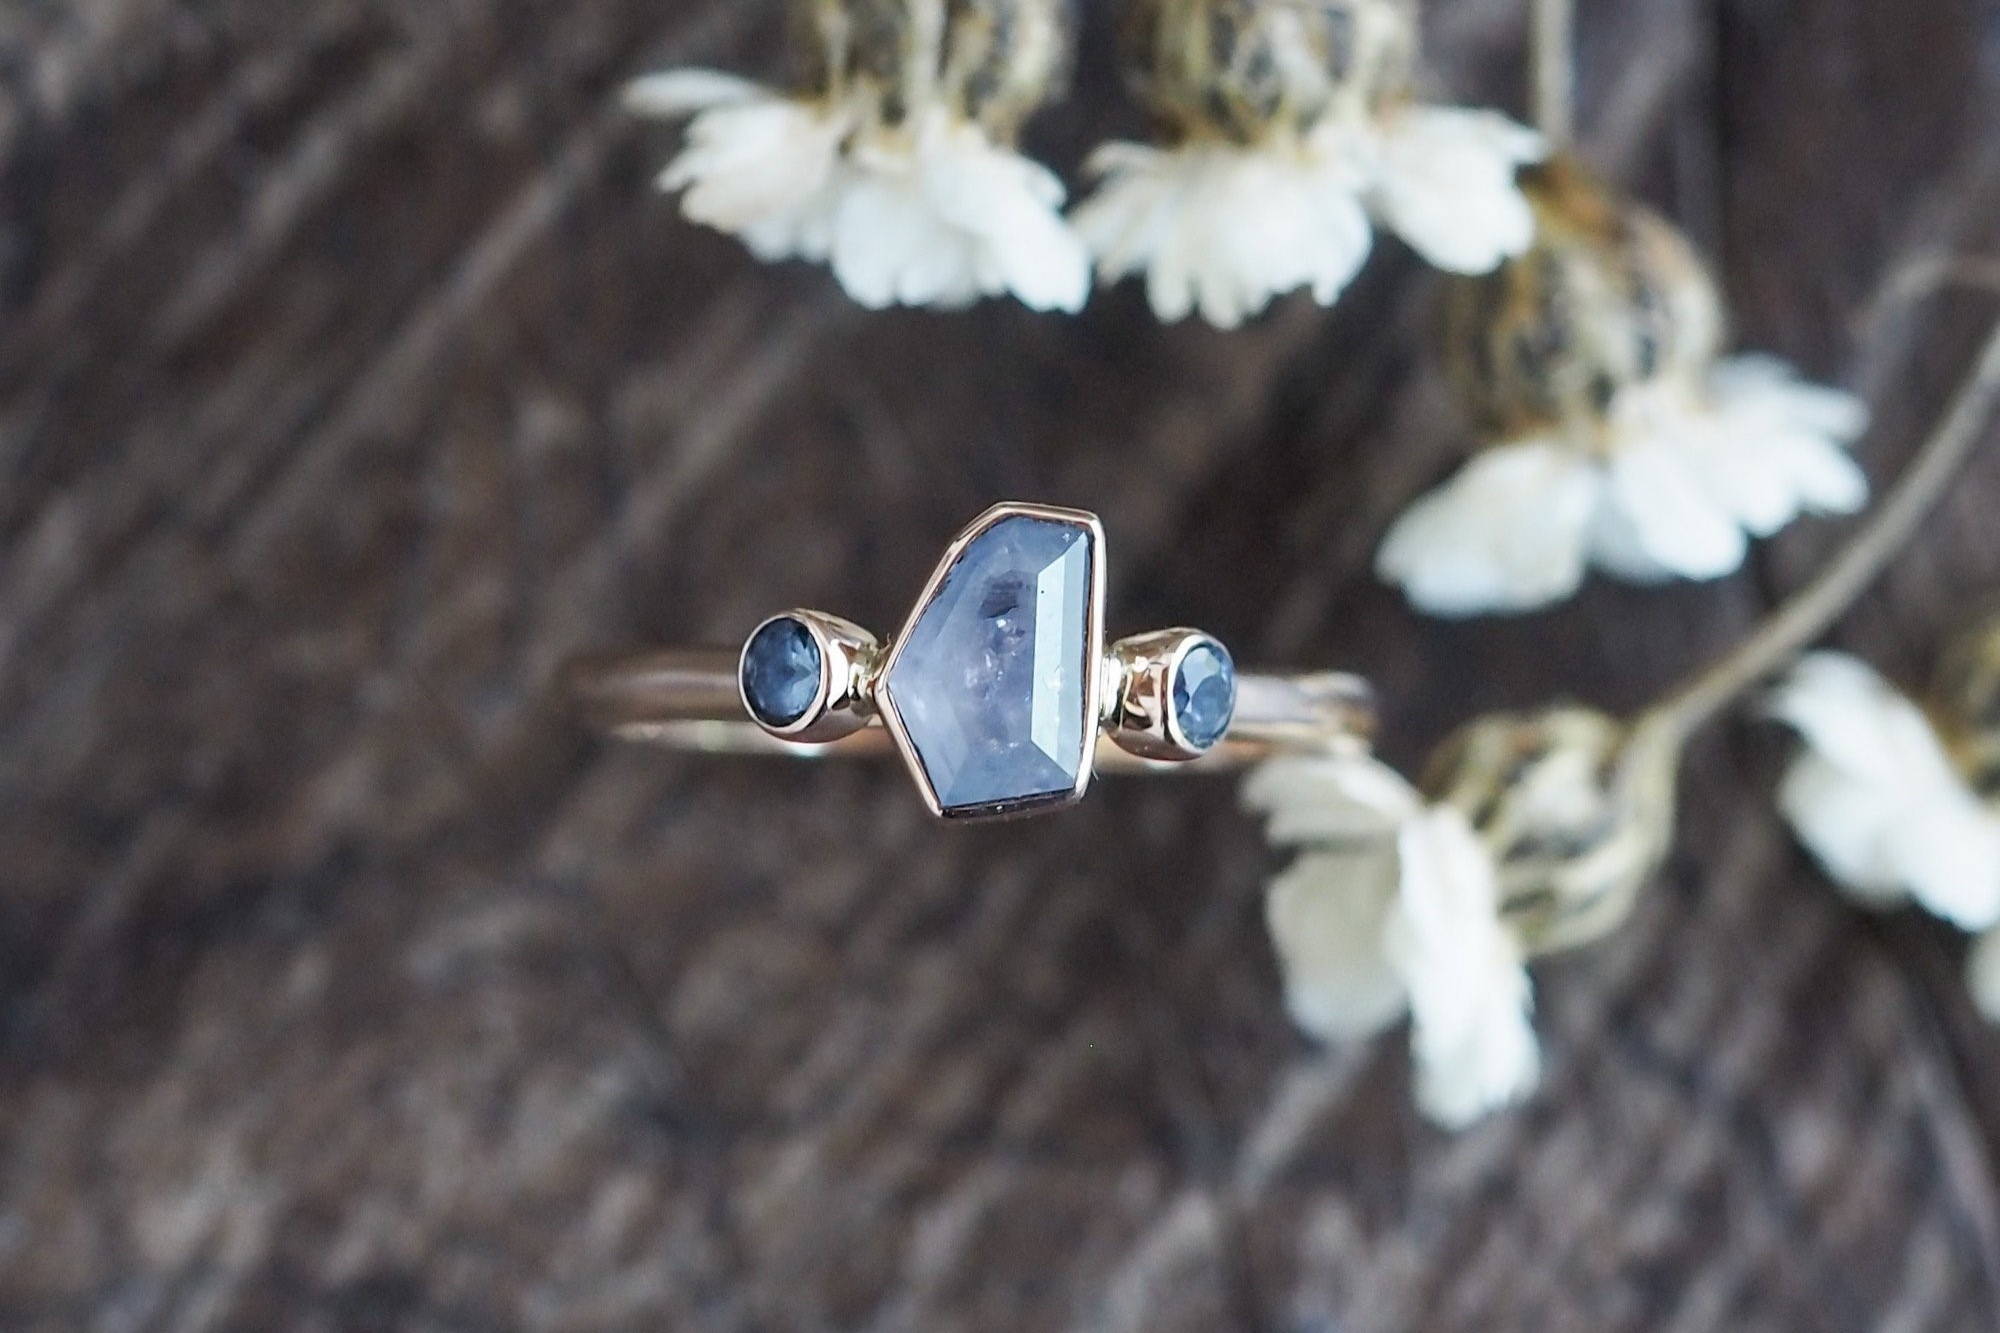 Custom made ethical gold sapphire rings are currently available in limited quantities.